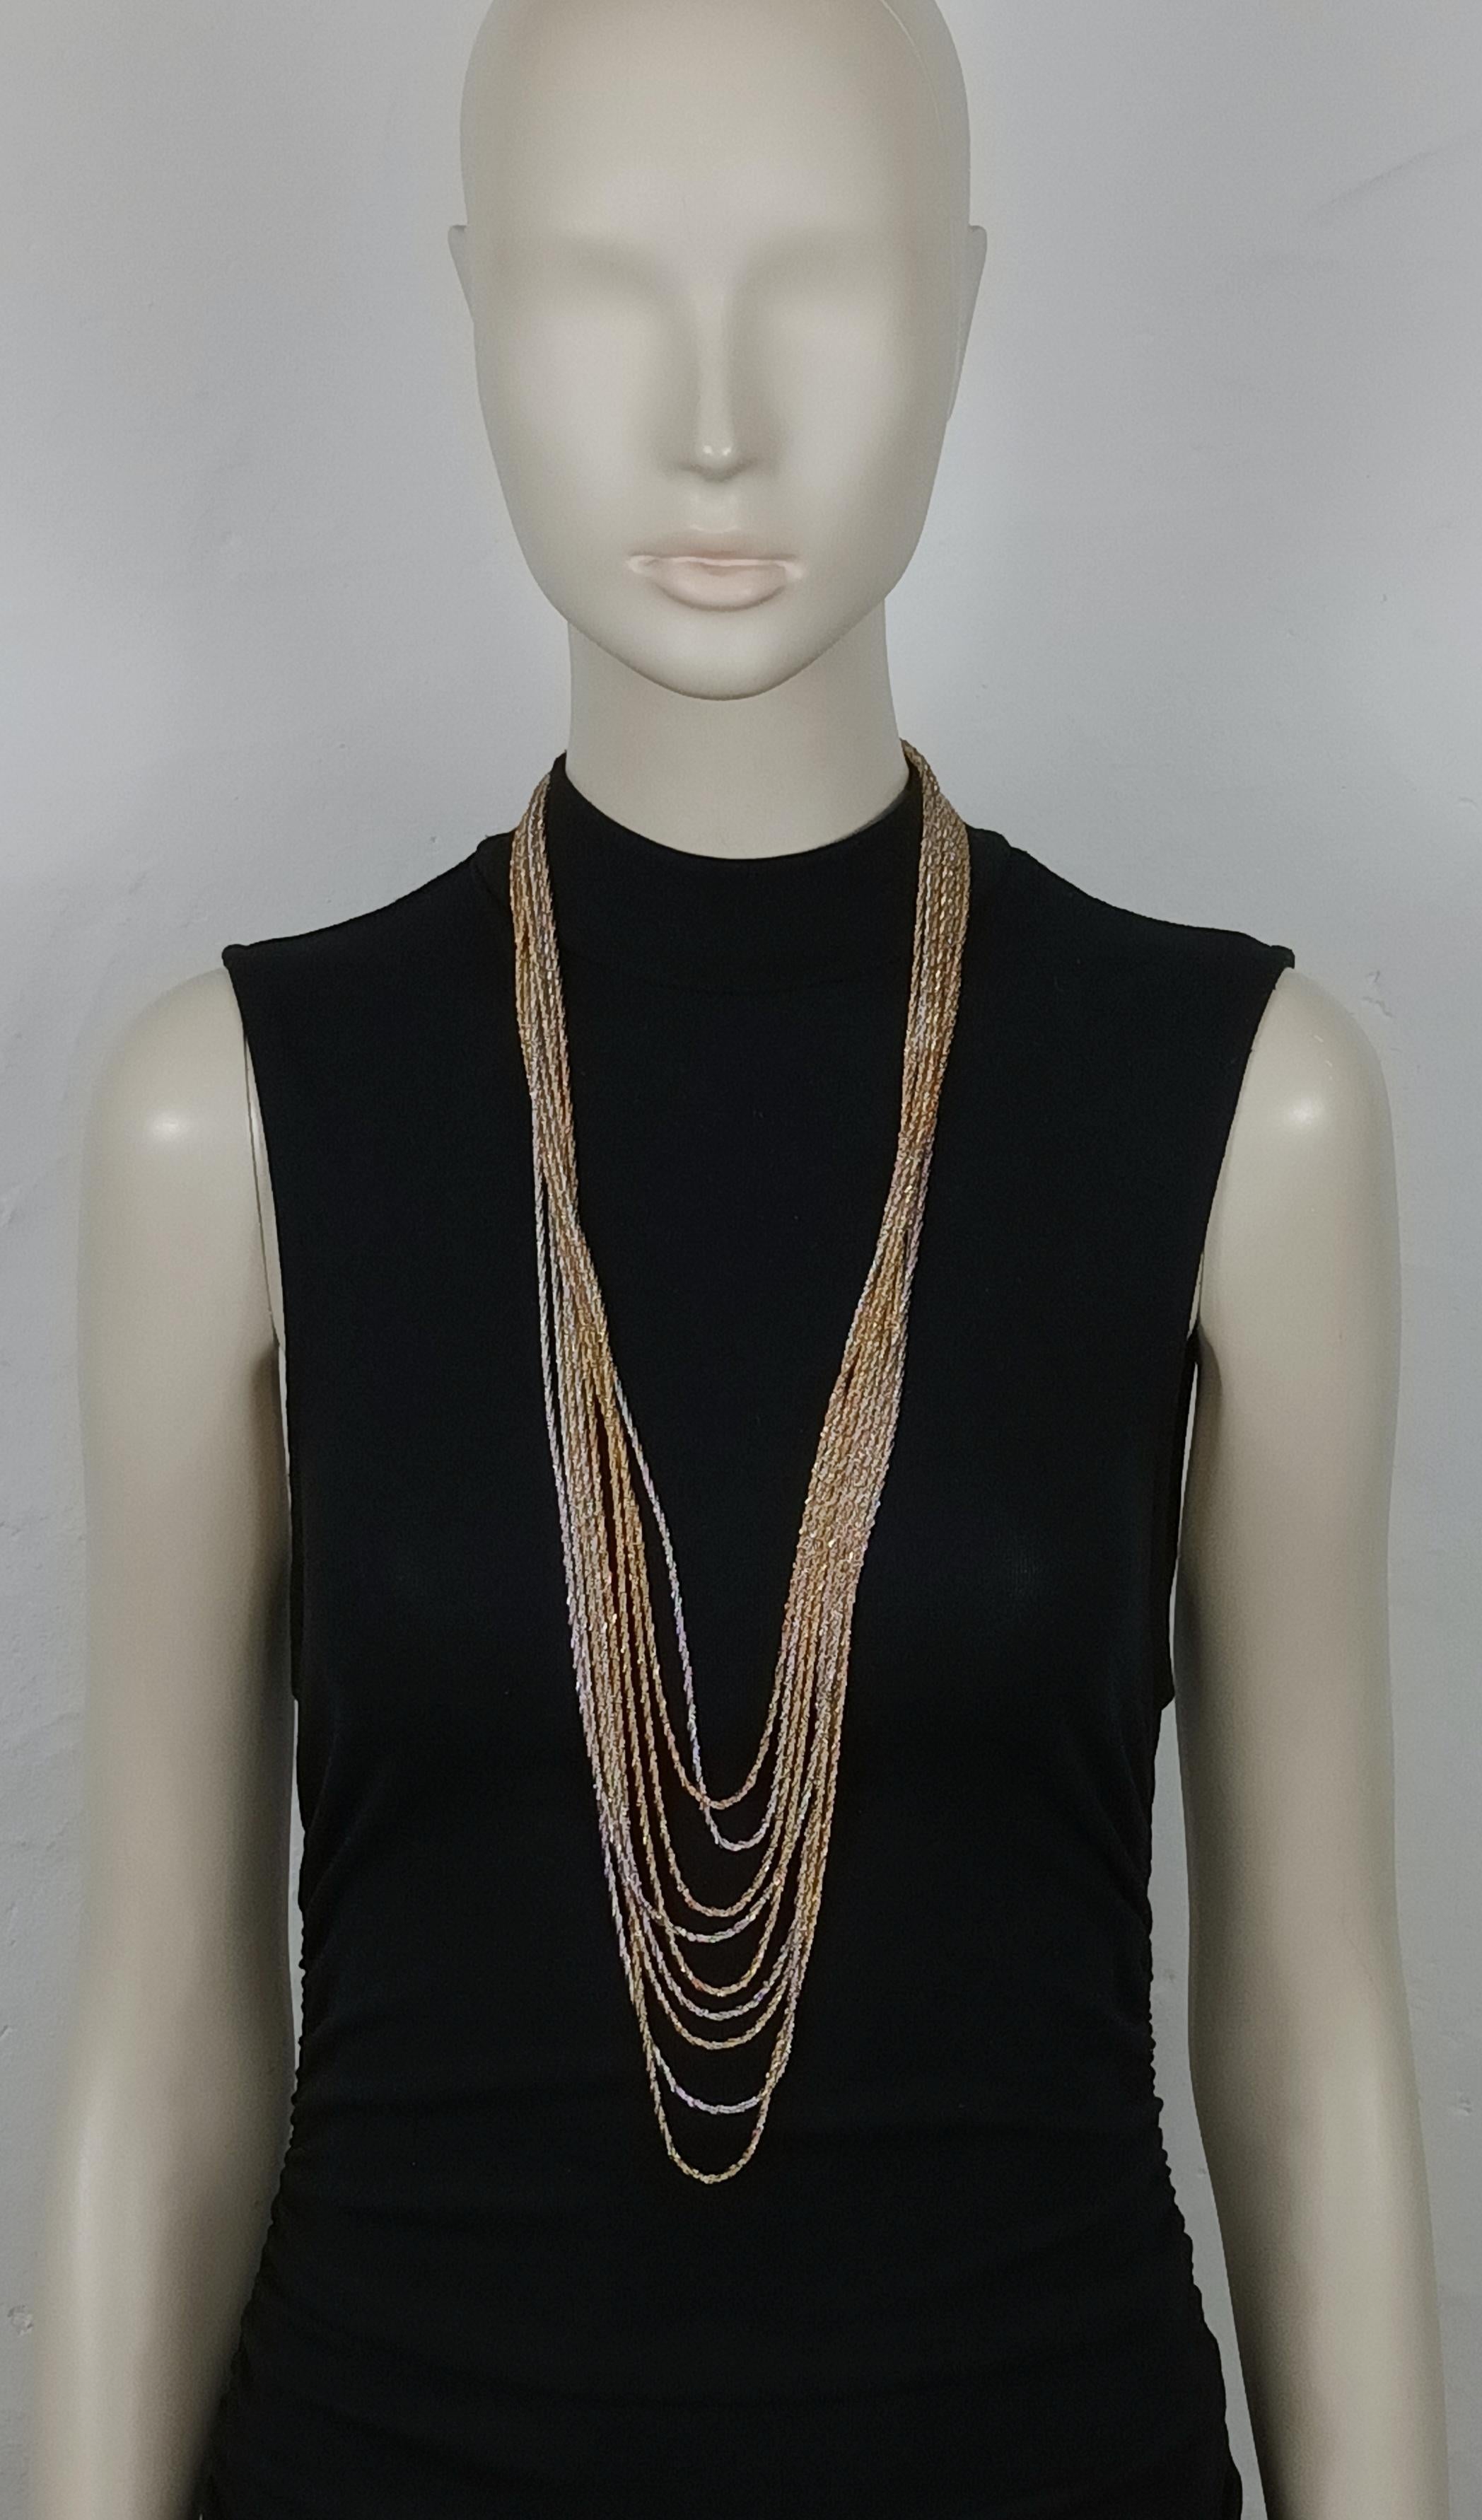 CHRISTIAN DIOR vintage two tone necklace featuring nine strands of twisted mesh chains.

Spring clasp closure.

Embossed 19 CHR. DIOR © 73 Germany.

Indicative measurements : length approx. 80 cm (31.50 inches).

Material : Gold tone metal hardware